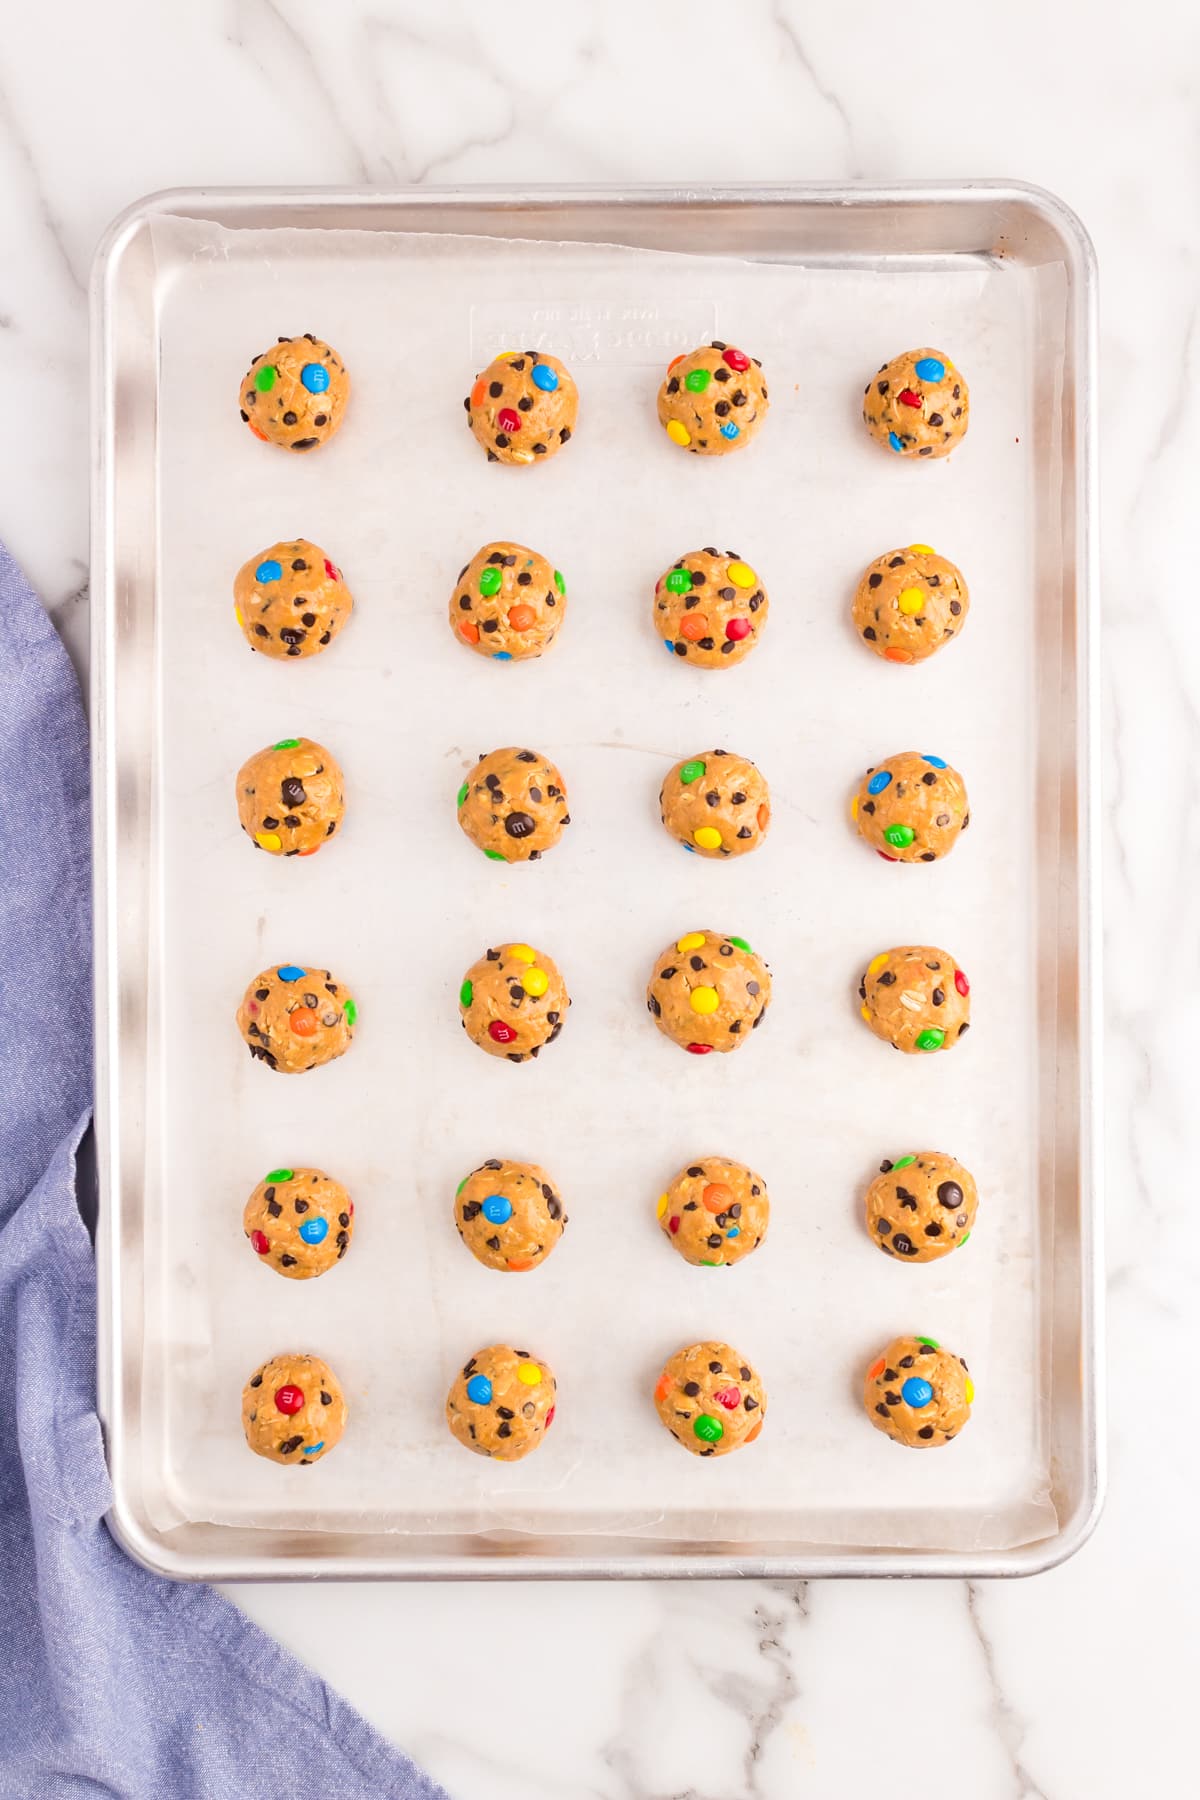 Using a cookie scoop, roll 1 inch balls together and put on a cookie sheet to put in the fridge to cool.